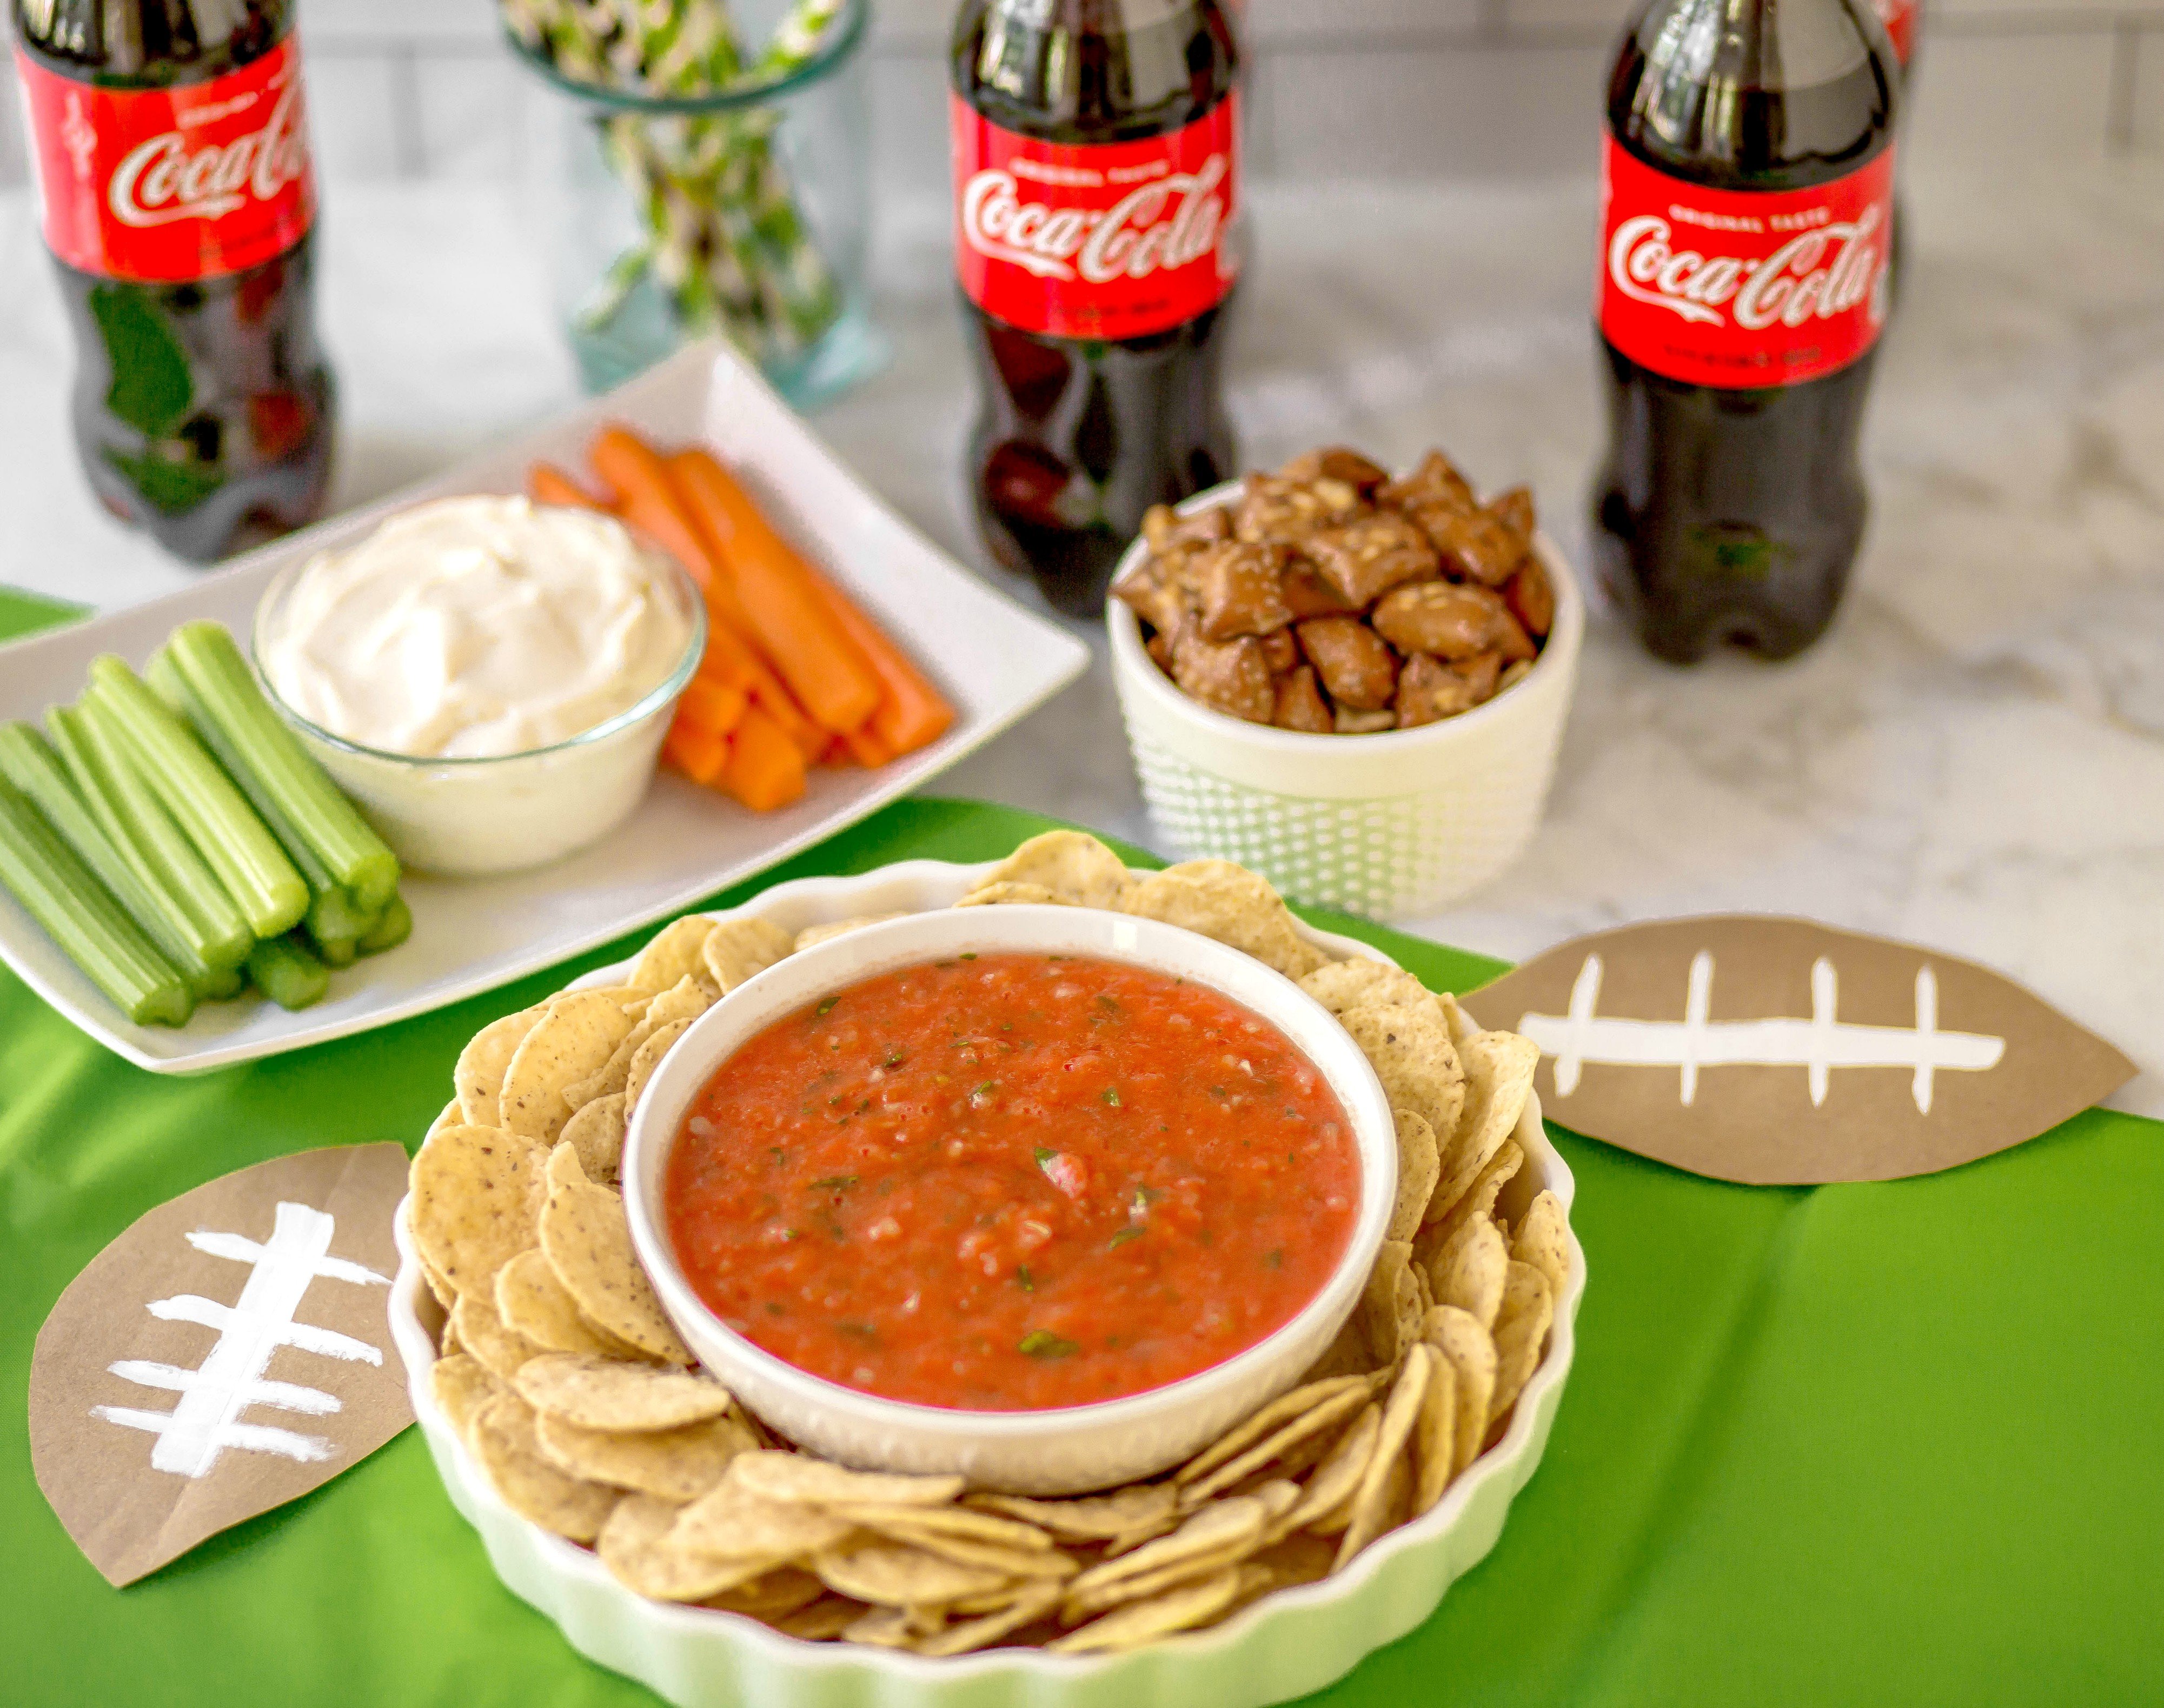 Football season is here and I've got 5 top tips for throwing a football party! Plus, you'll love my quick and easy 5 Minute Homemade Salsa recipe! Full story @ www.hipmamasplace.com! #AD #SoFabFood #HomeGatingHacks #CollectiveBias